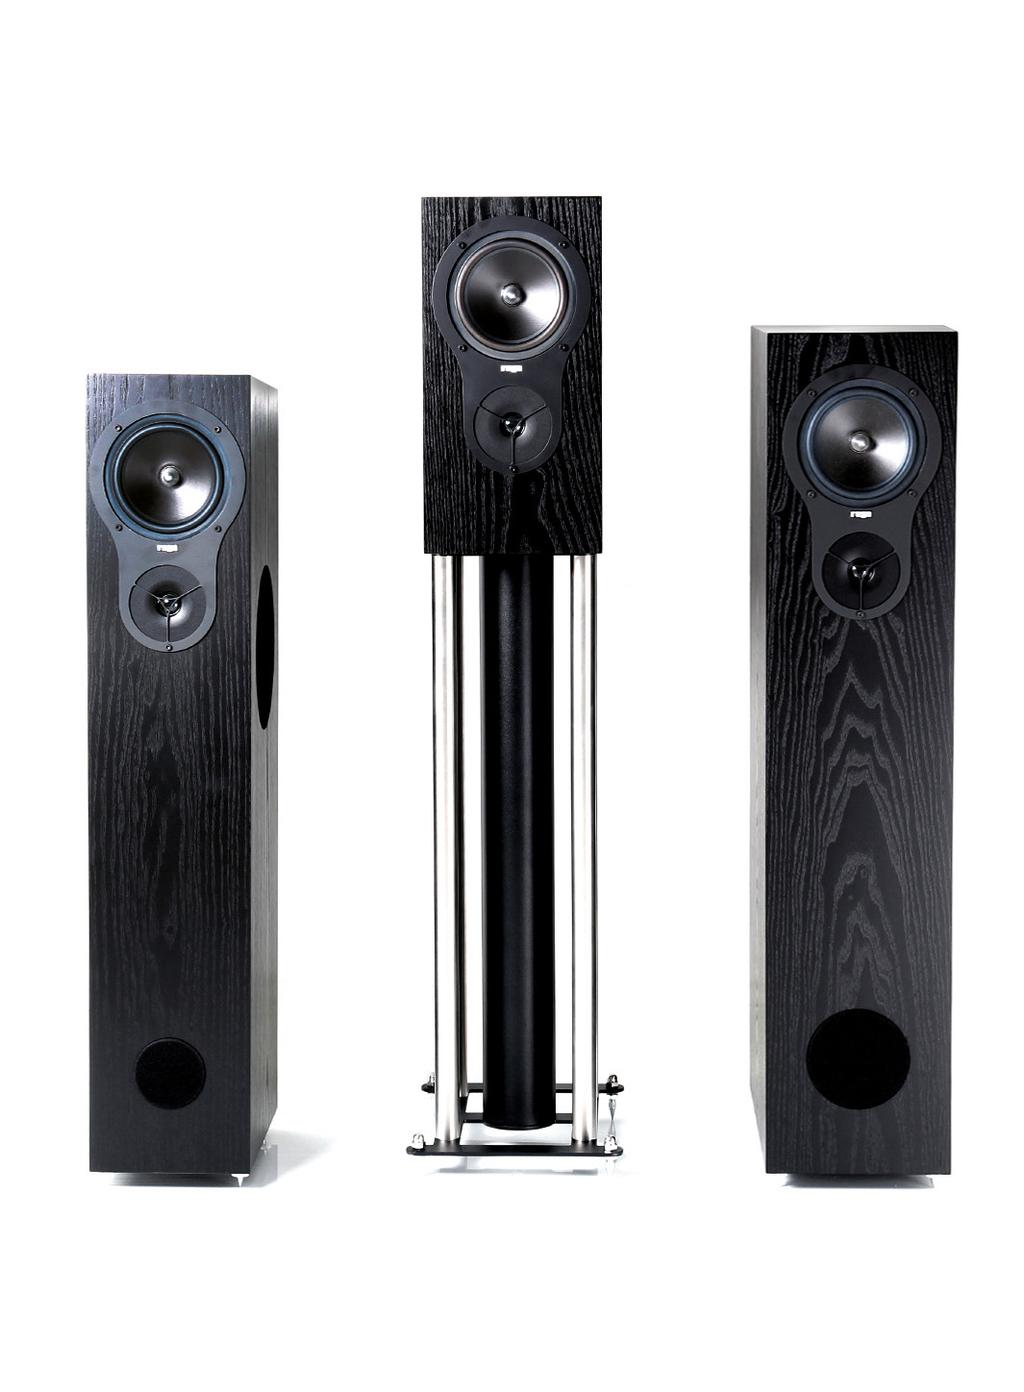 RX LOUDSPEAKER RANGE RX-3 RX-1* RX-5 The RX loudspeaker range is presented in premium cabinets, finished with a selection of high quality, real wood veneers.